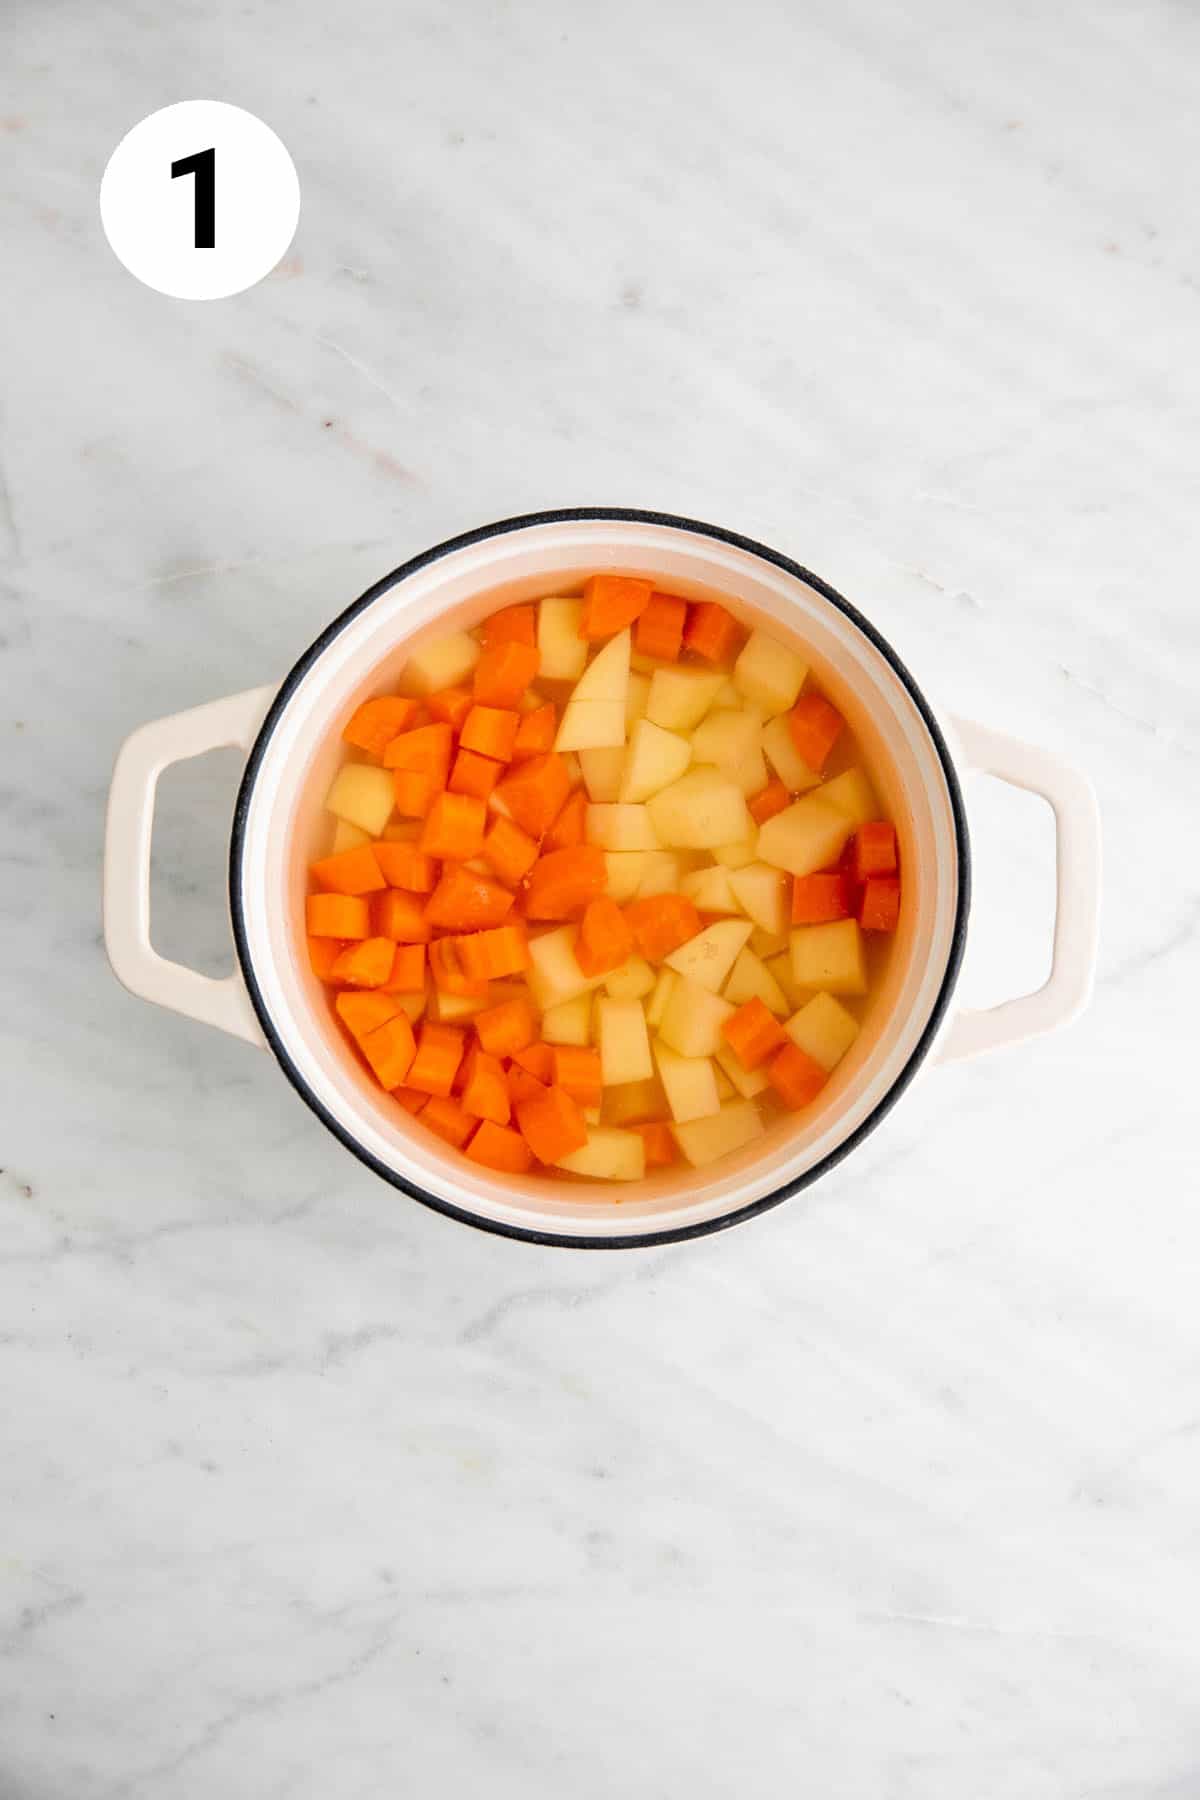 Uncooked potatoes and carrots in a pot with water.